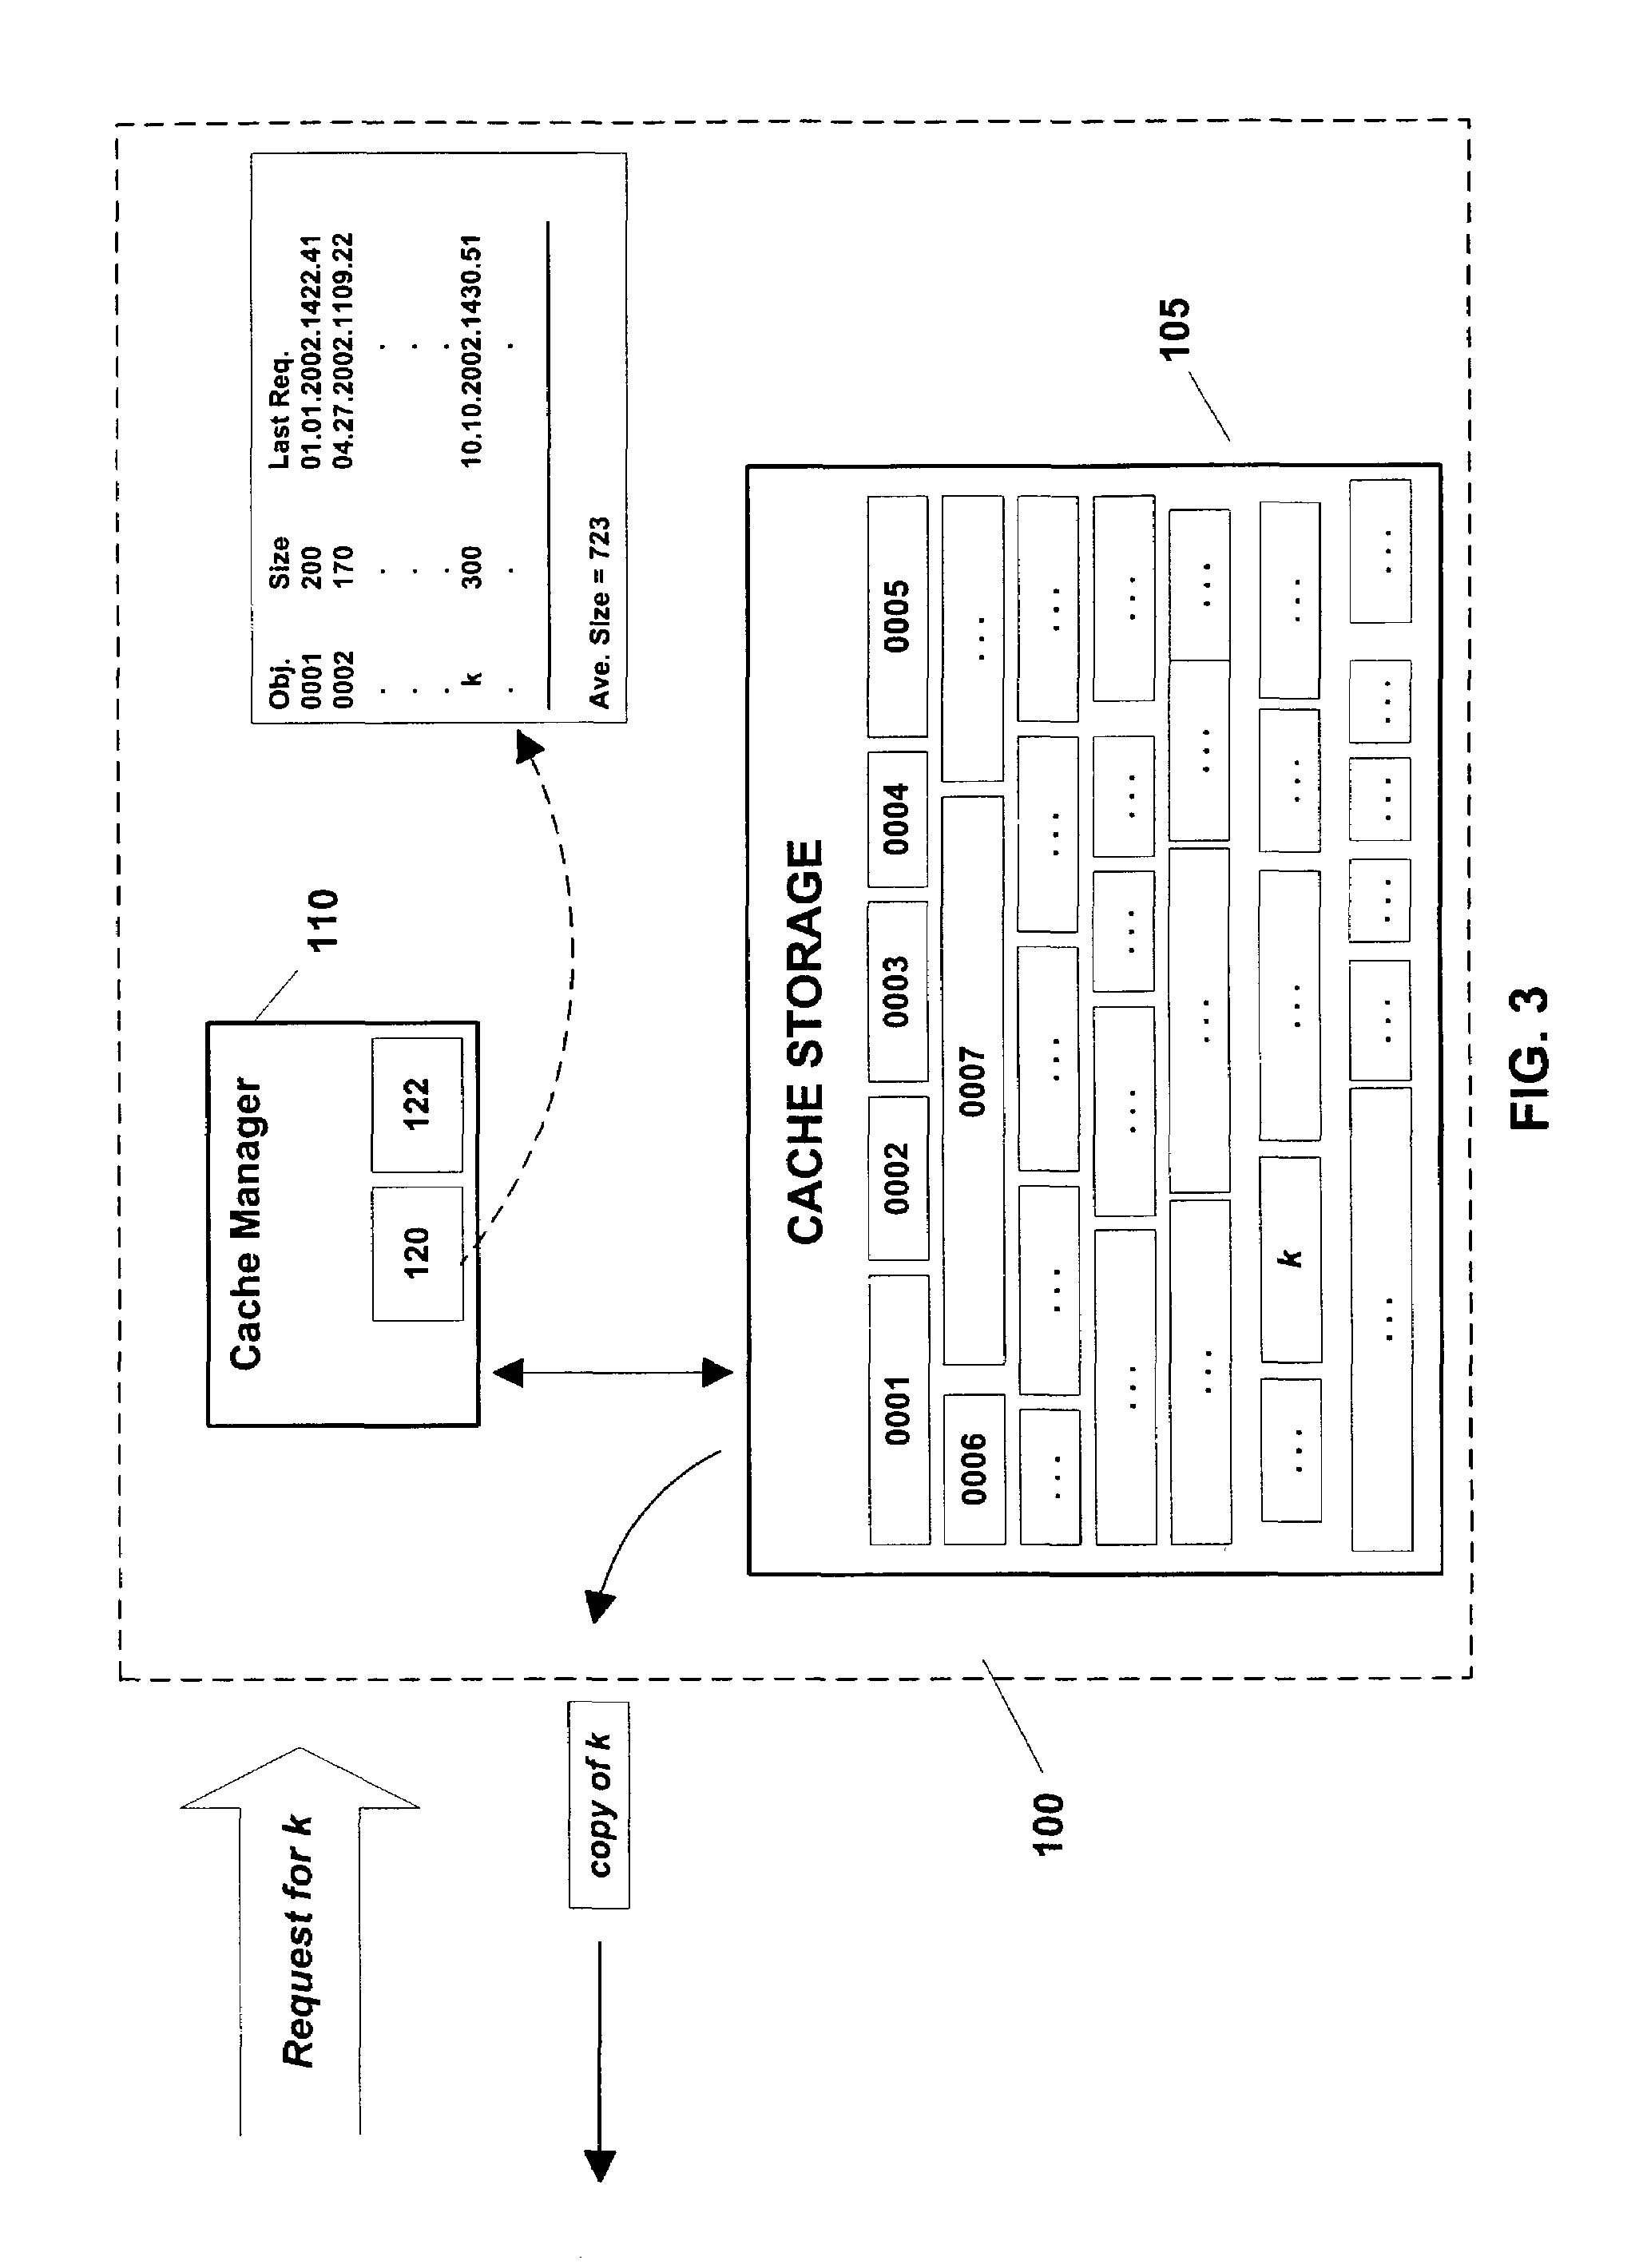 Memory admission control based on object size or request frequency